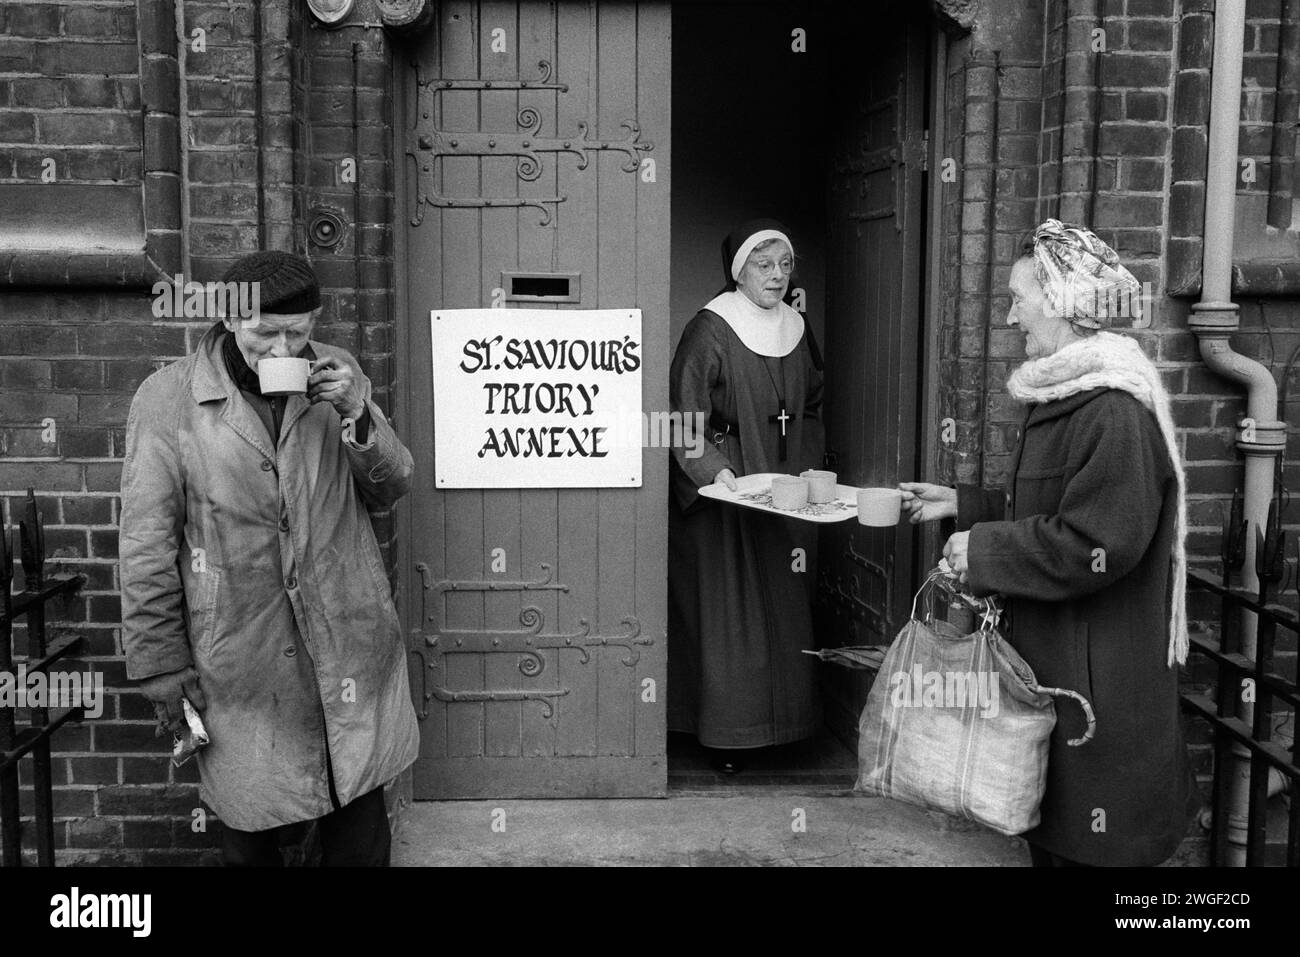 Homeless destitute 1970s UK. Sister Patricia hands out cups of tea from St Saviour's Priory annex, Kingsland Road, London. The Sisters of St Margaret, explore contemporary ways of living the religious life in the community through a balance of prayer and ministry amongst marginalised groups; the homeless, alcoholics, and racial minorities who are in need. Hoxton, London, England 1978. HOMER SYKES Stock Photo